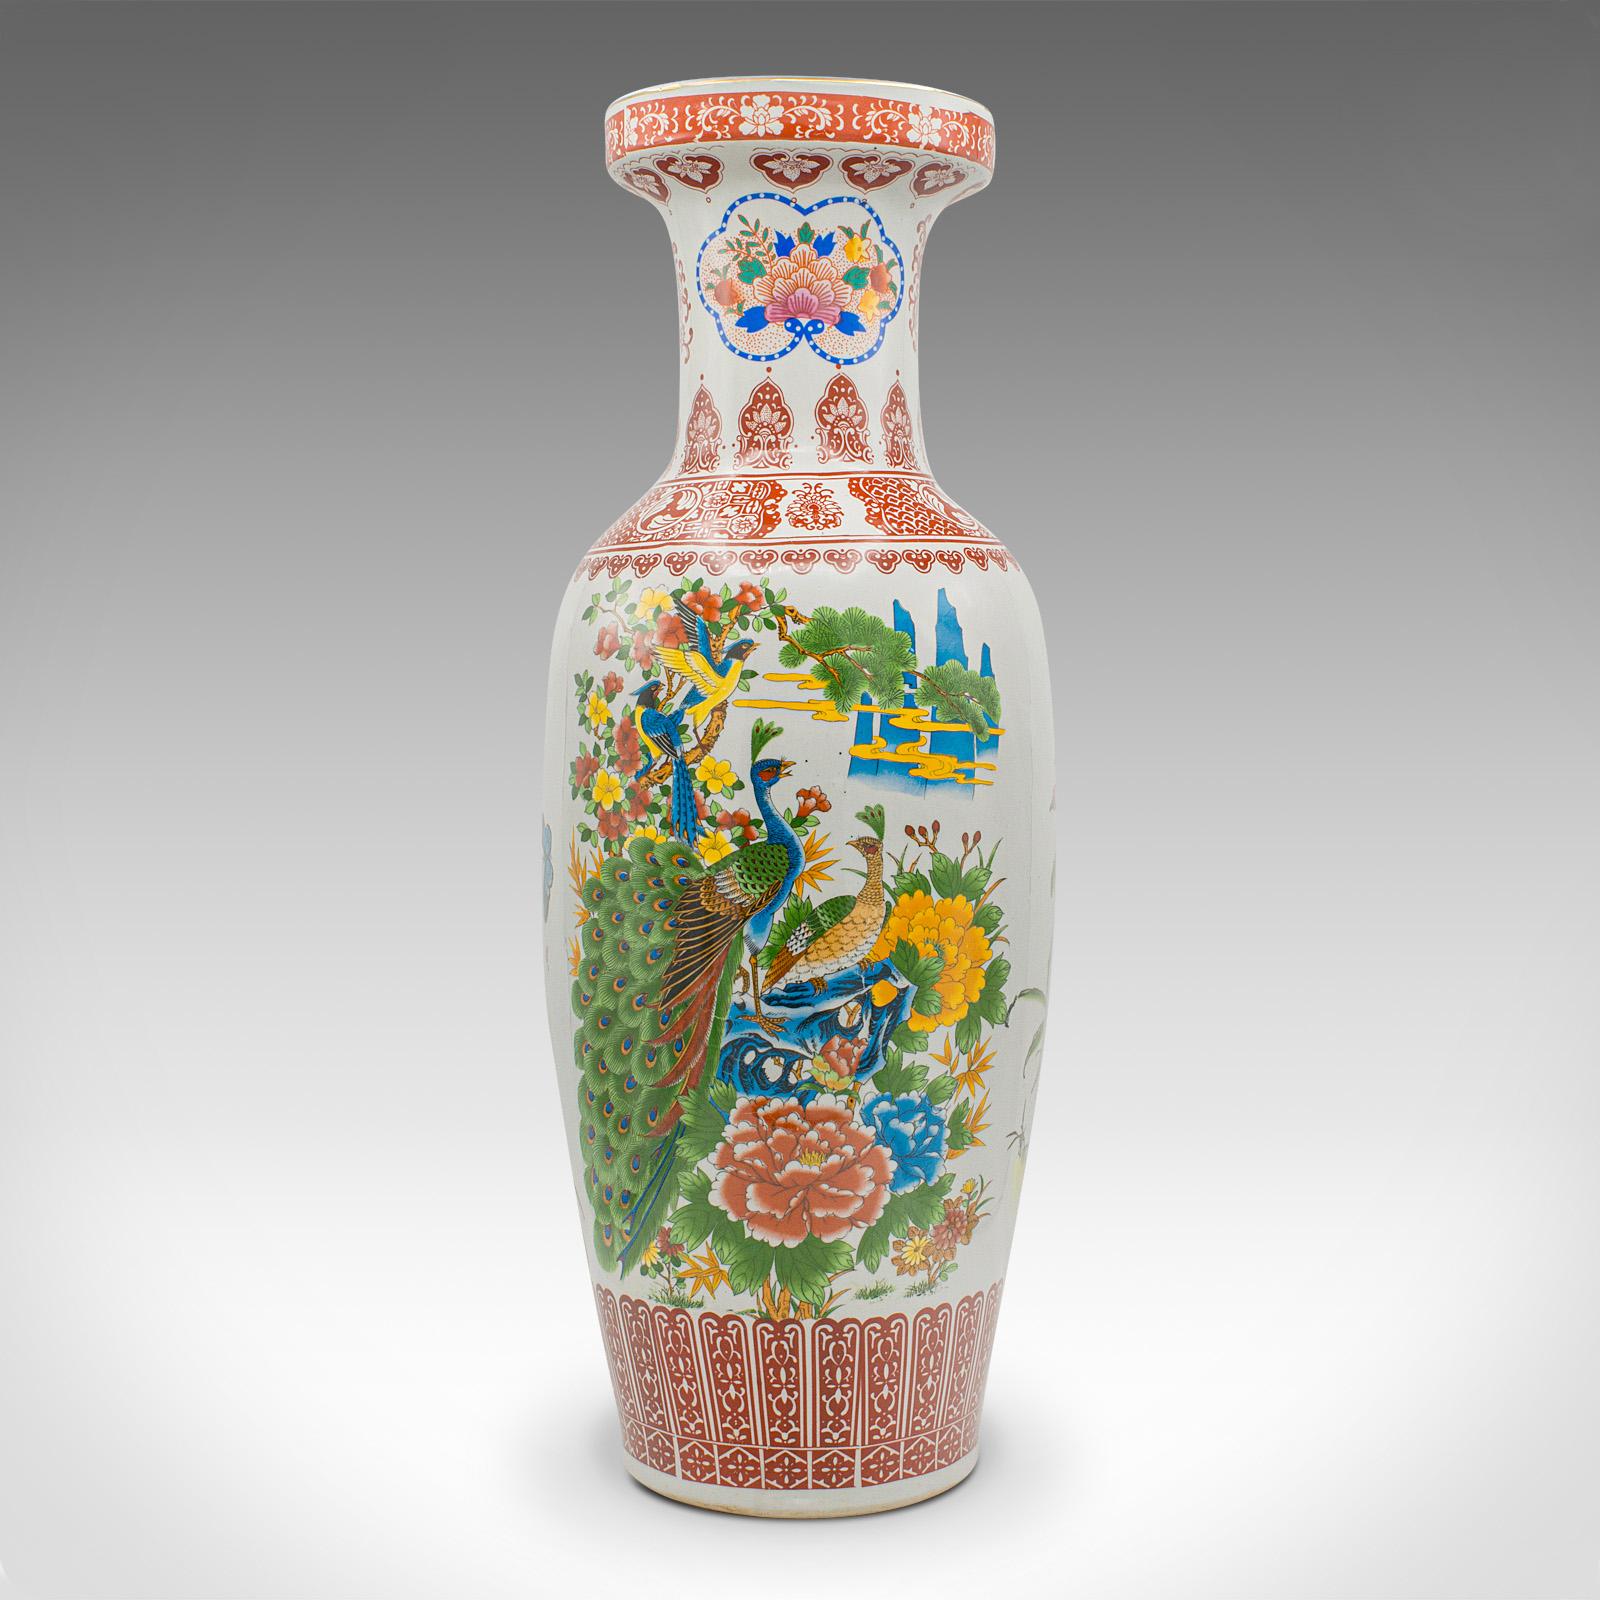 This is a tall vintage peacock vase. A Chinese, ceramic baluster urn with late Art deco taste, dating to the mid 20th century, circa 1950.

Charmingly colourful, with generous proportion and form
Displays a desirable aged patina and in good